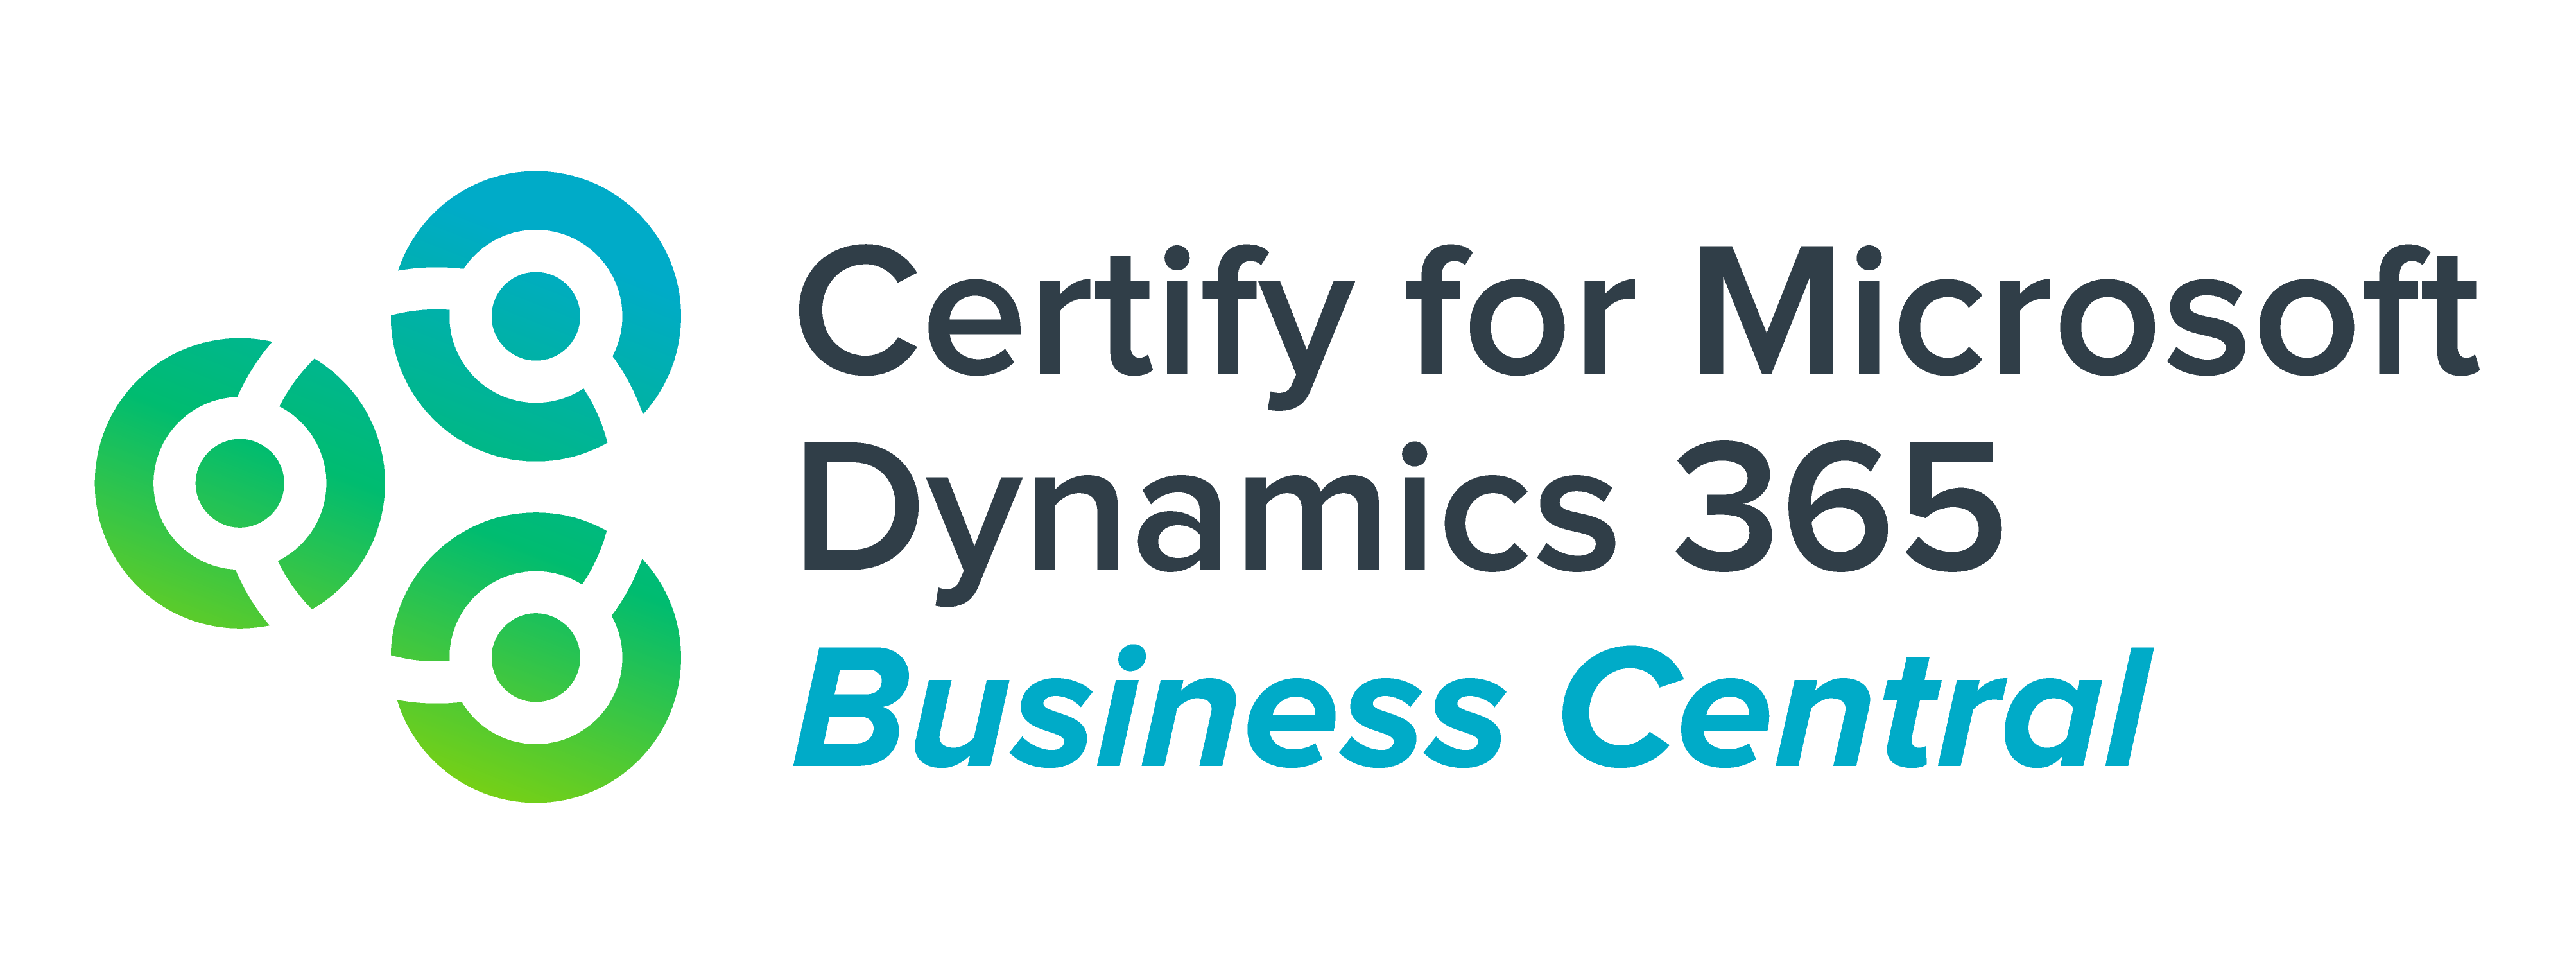 certify for microsoft dynamics 365 business central